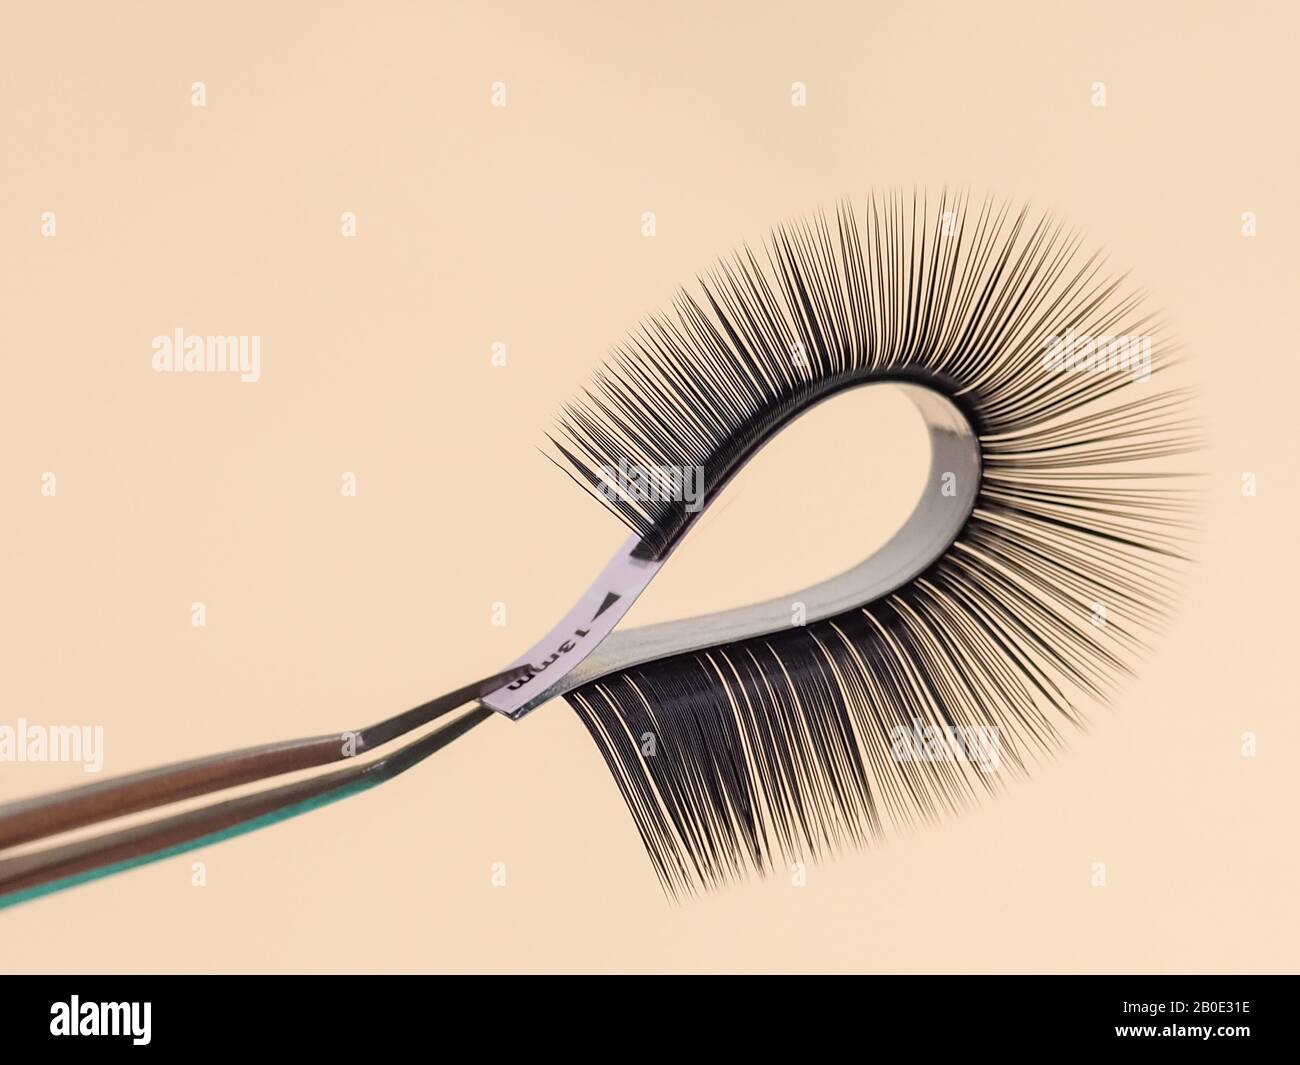 strip for eyelash extensions on a uniform tone, twisted, held with tweezers. Industry artificial eyelashes, eyelash extensions, beauty. Stock Photo